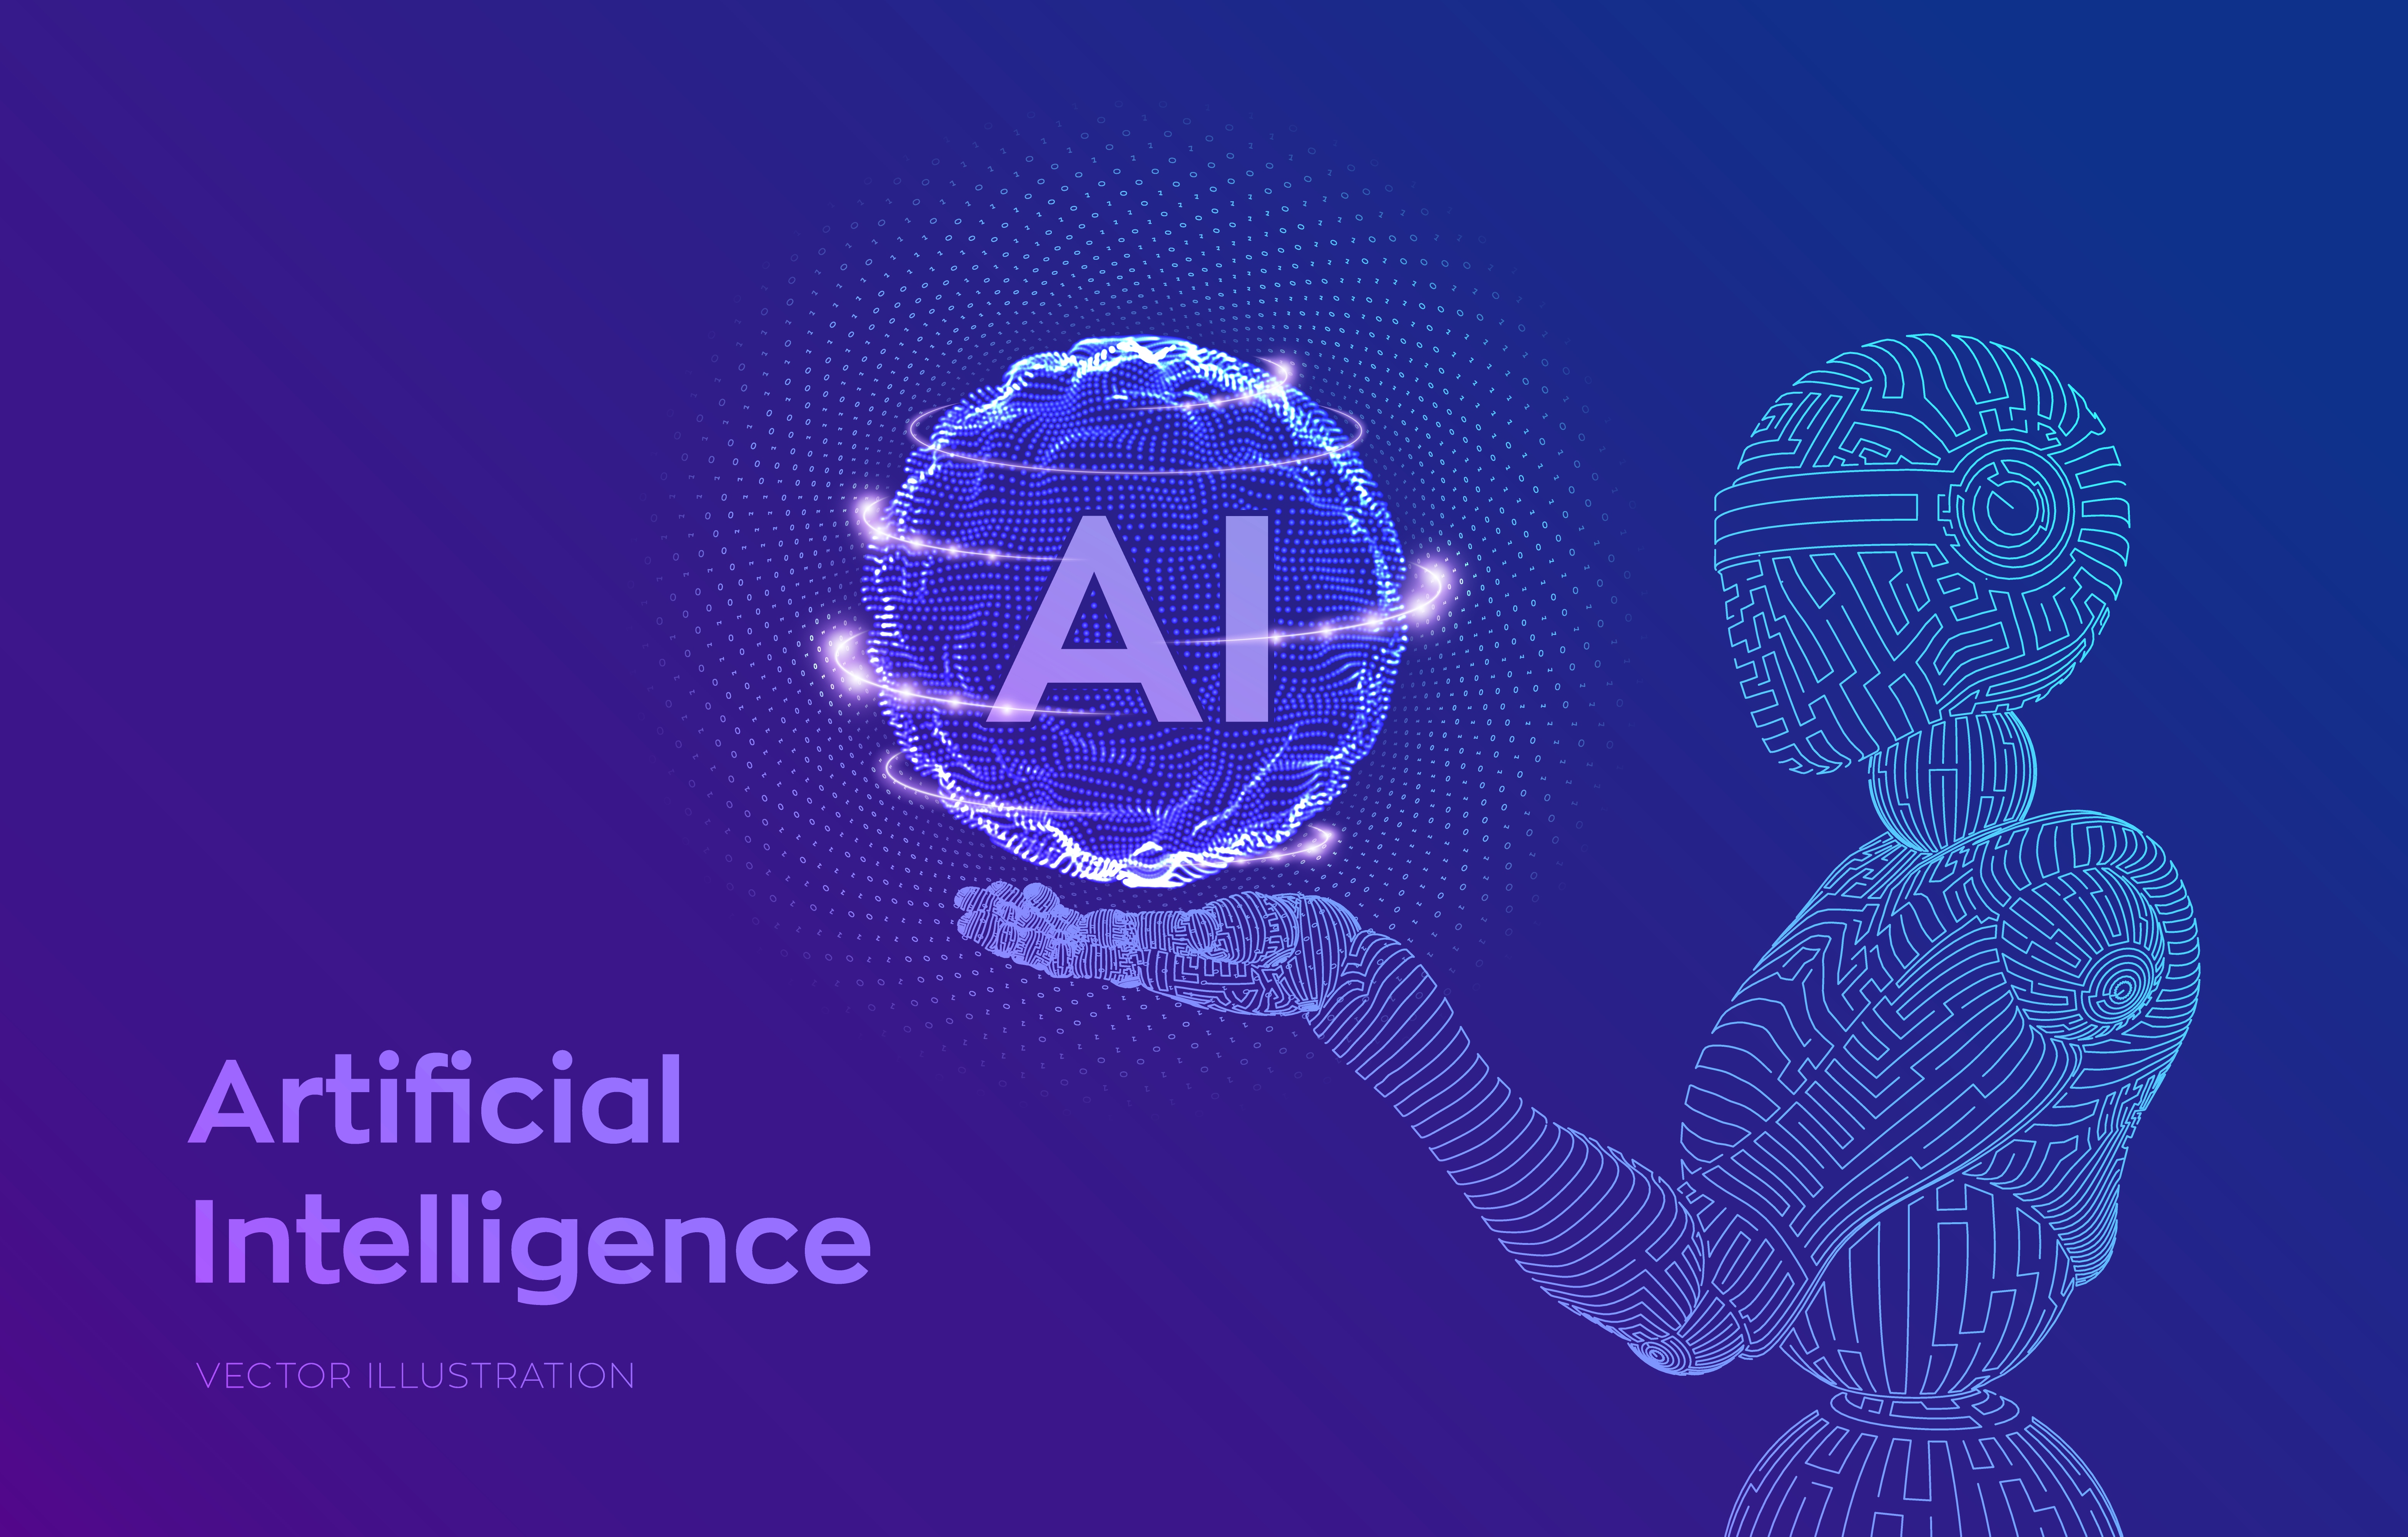 Artificial Intelligence and marketing, the new engine of business